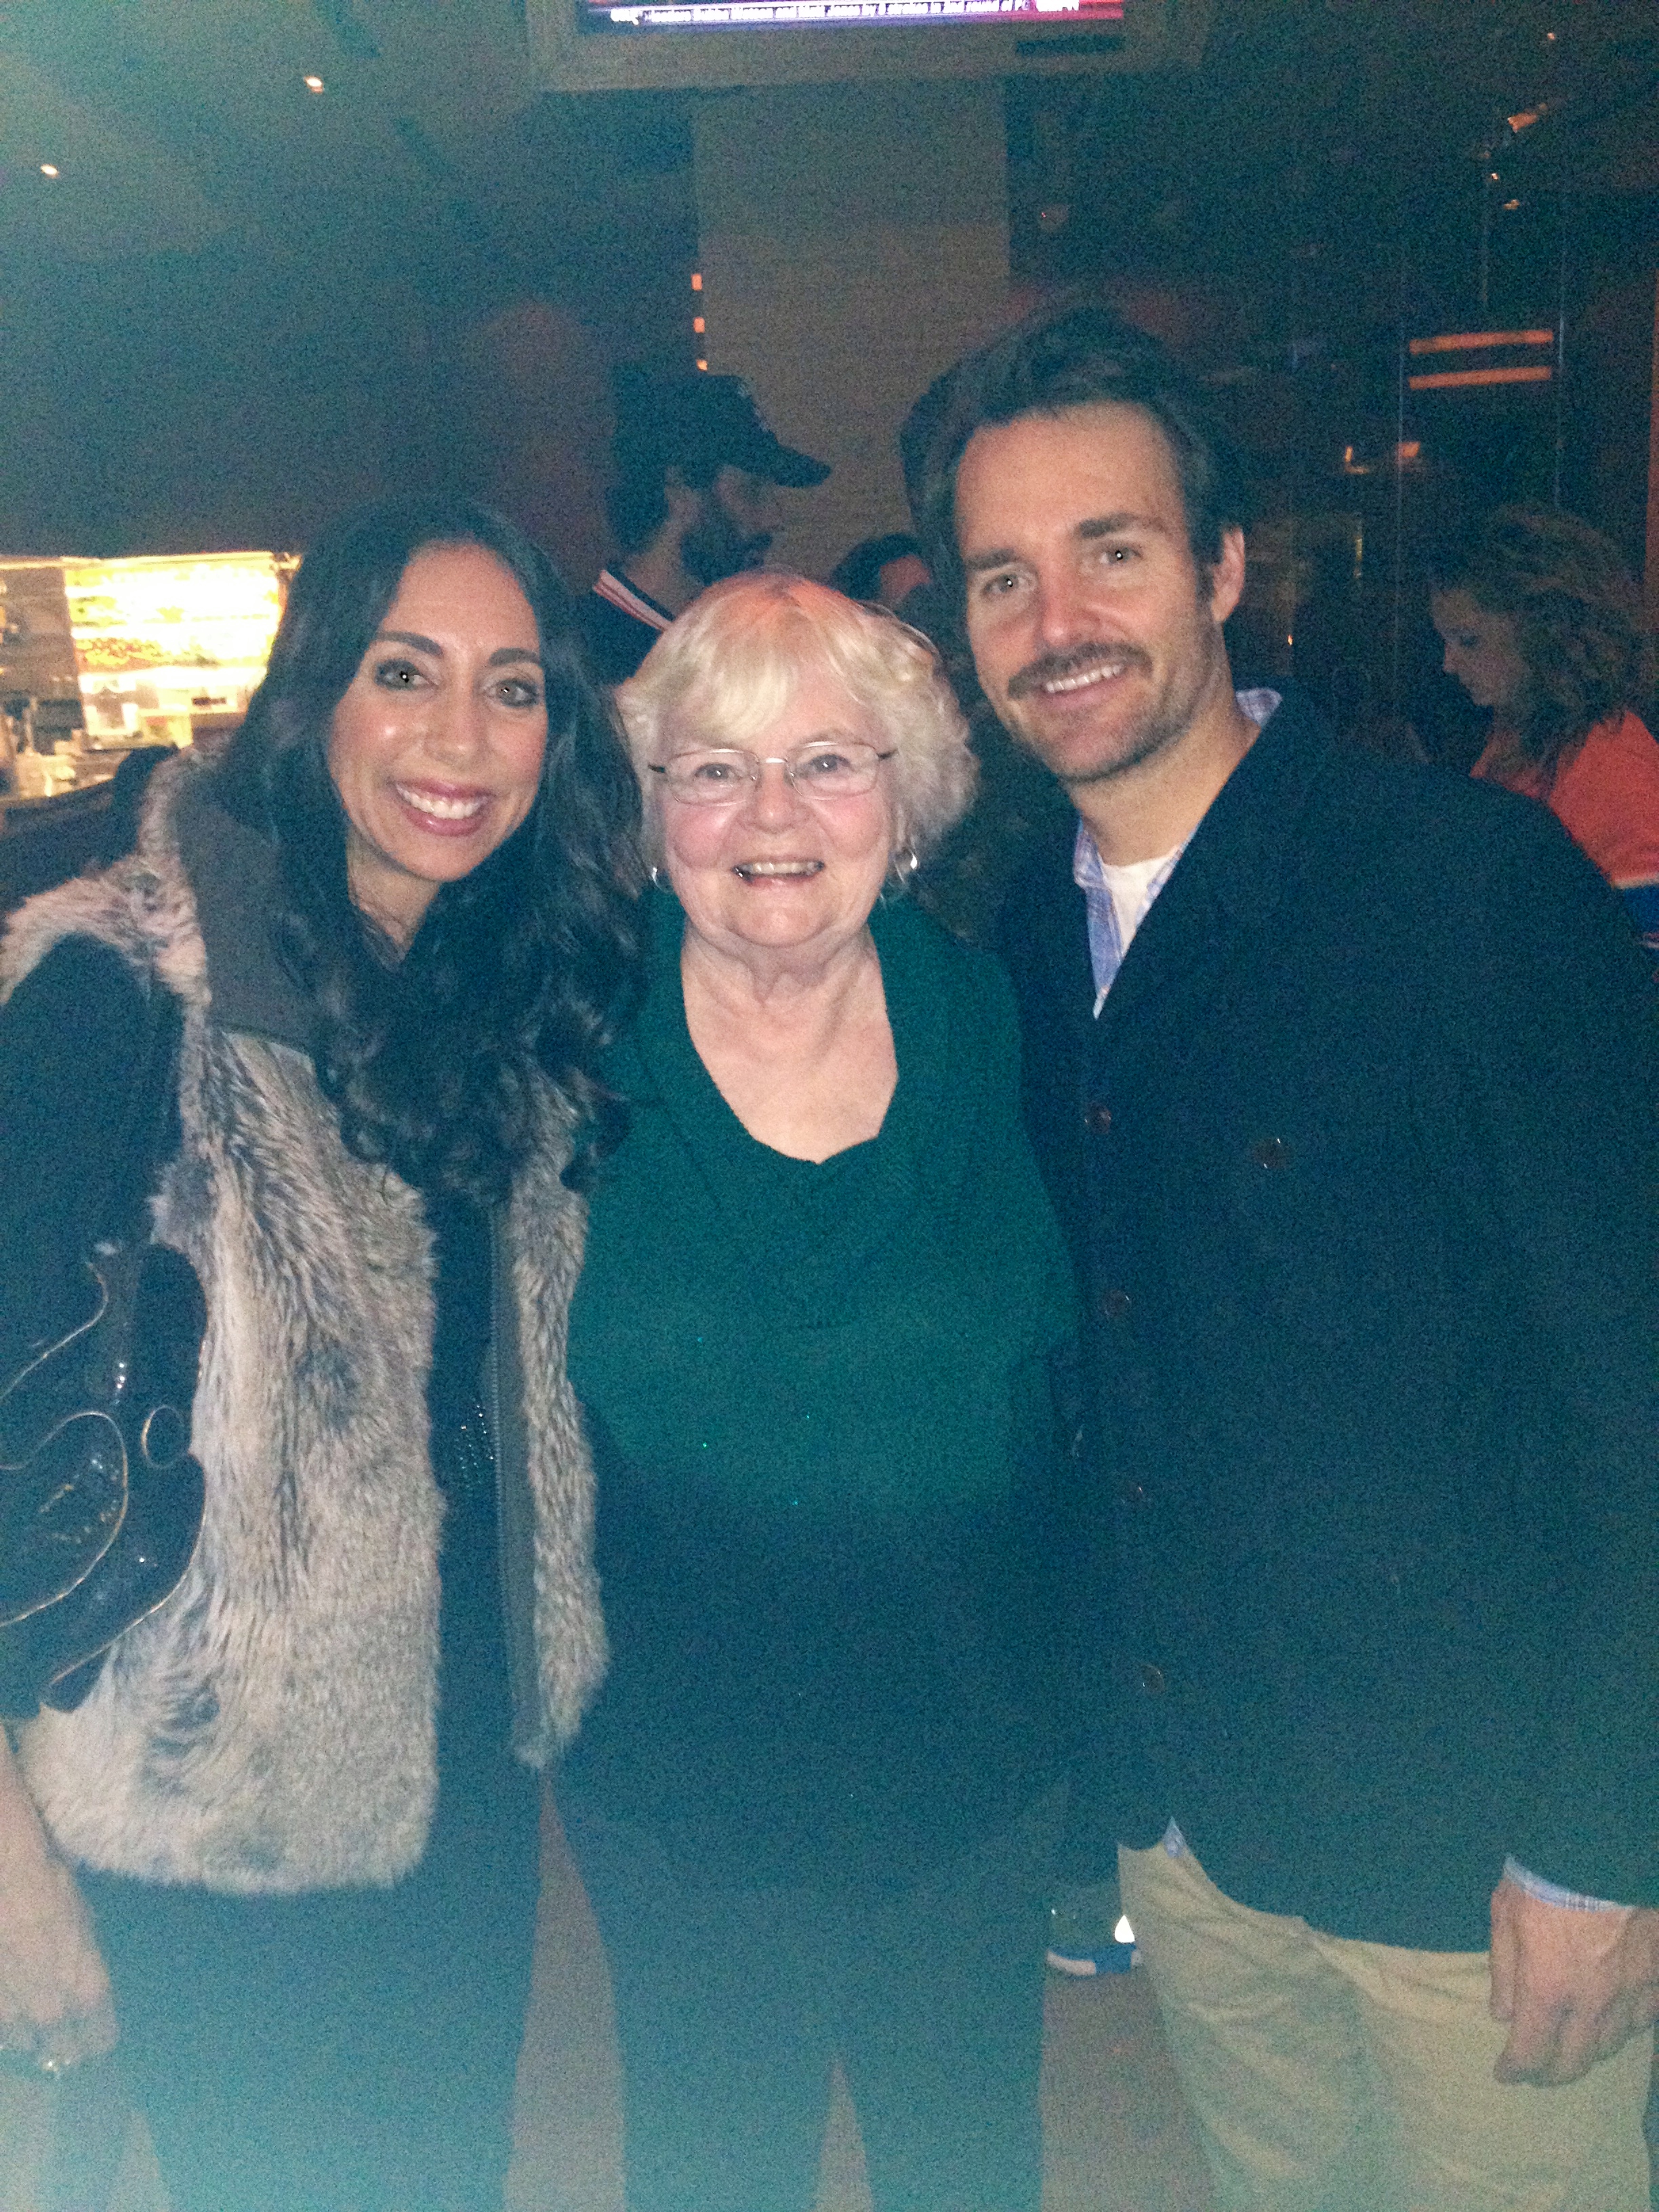 Run & Jump Screening for IFC at Sundance Cinemas with Will Forte and June Squibb